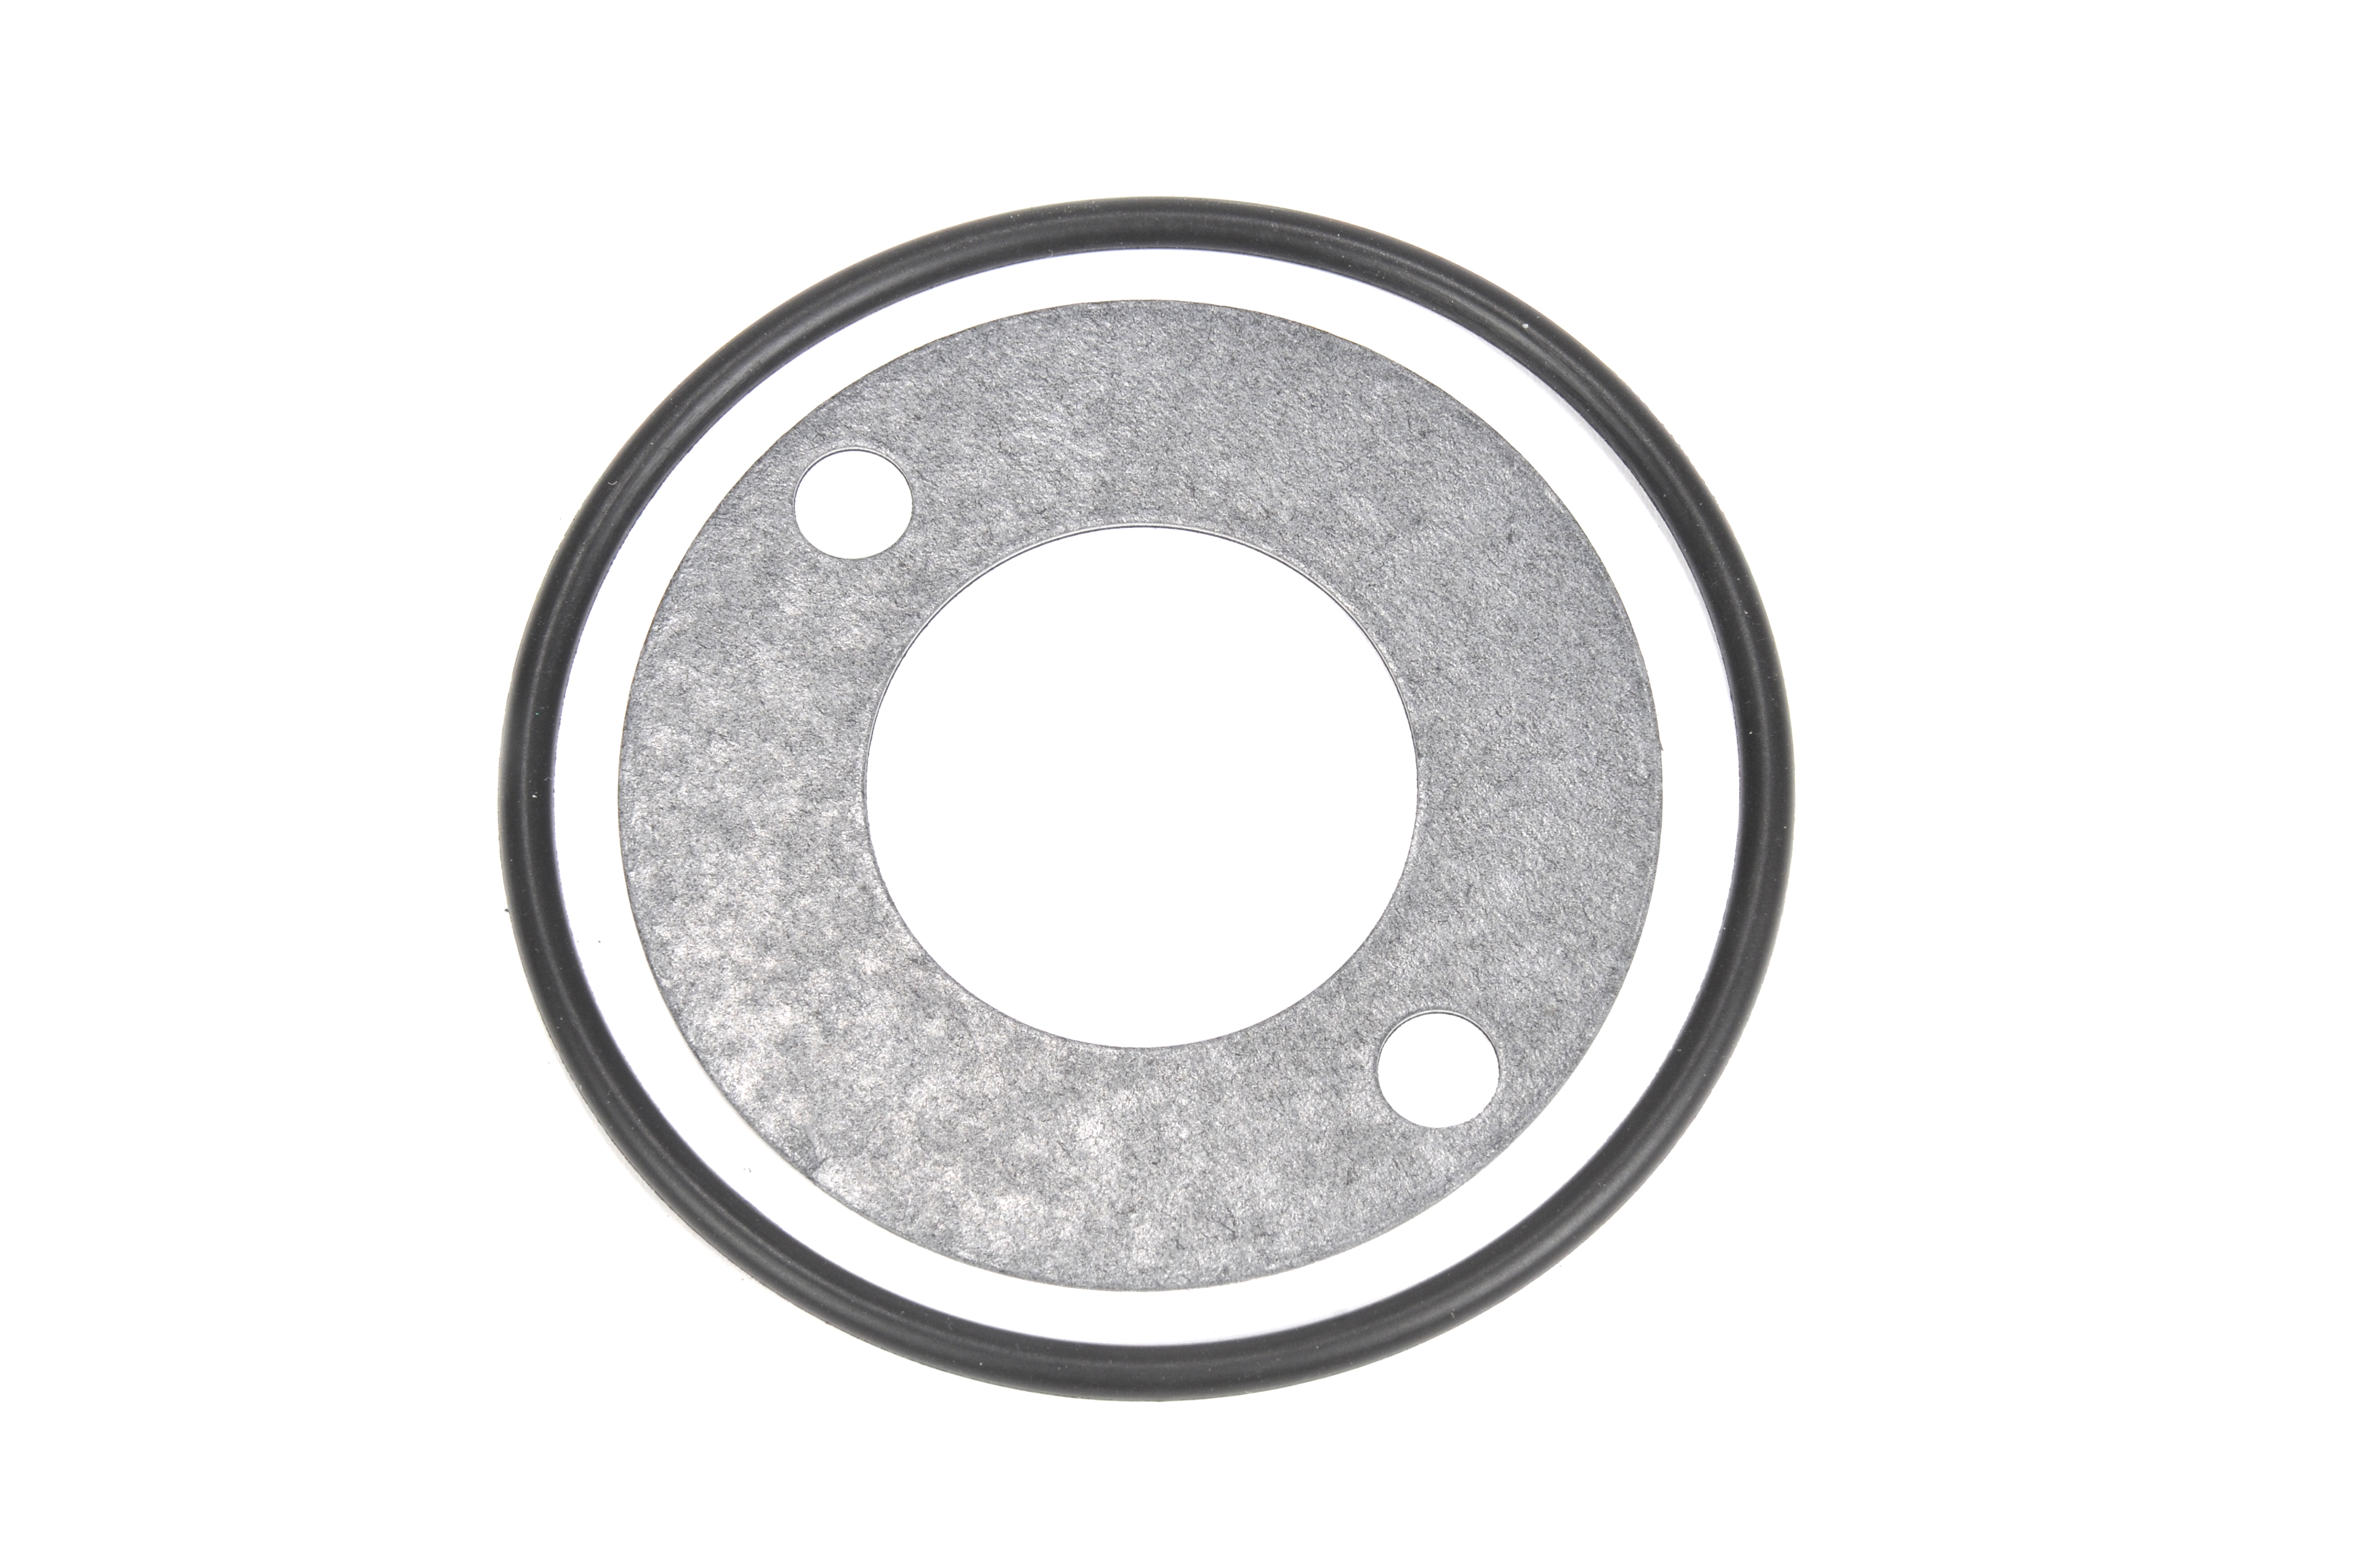 GM GENUINE PARTS - Engine Oil Filter Adapter Gasket - GMP 88893990